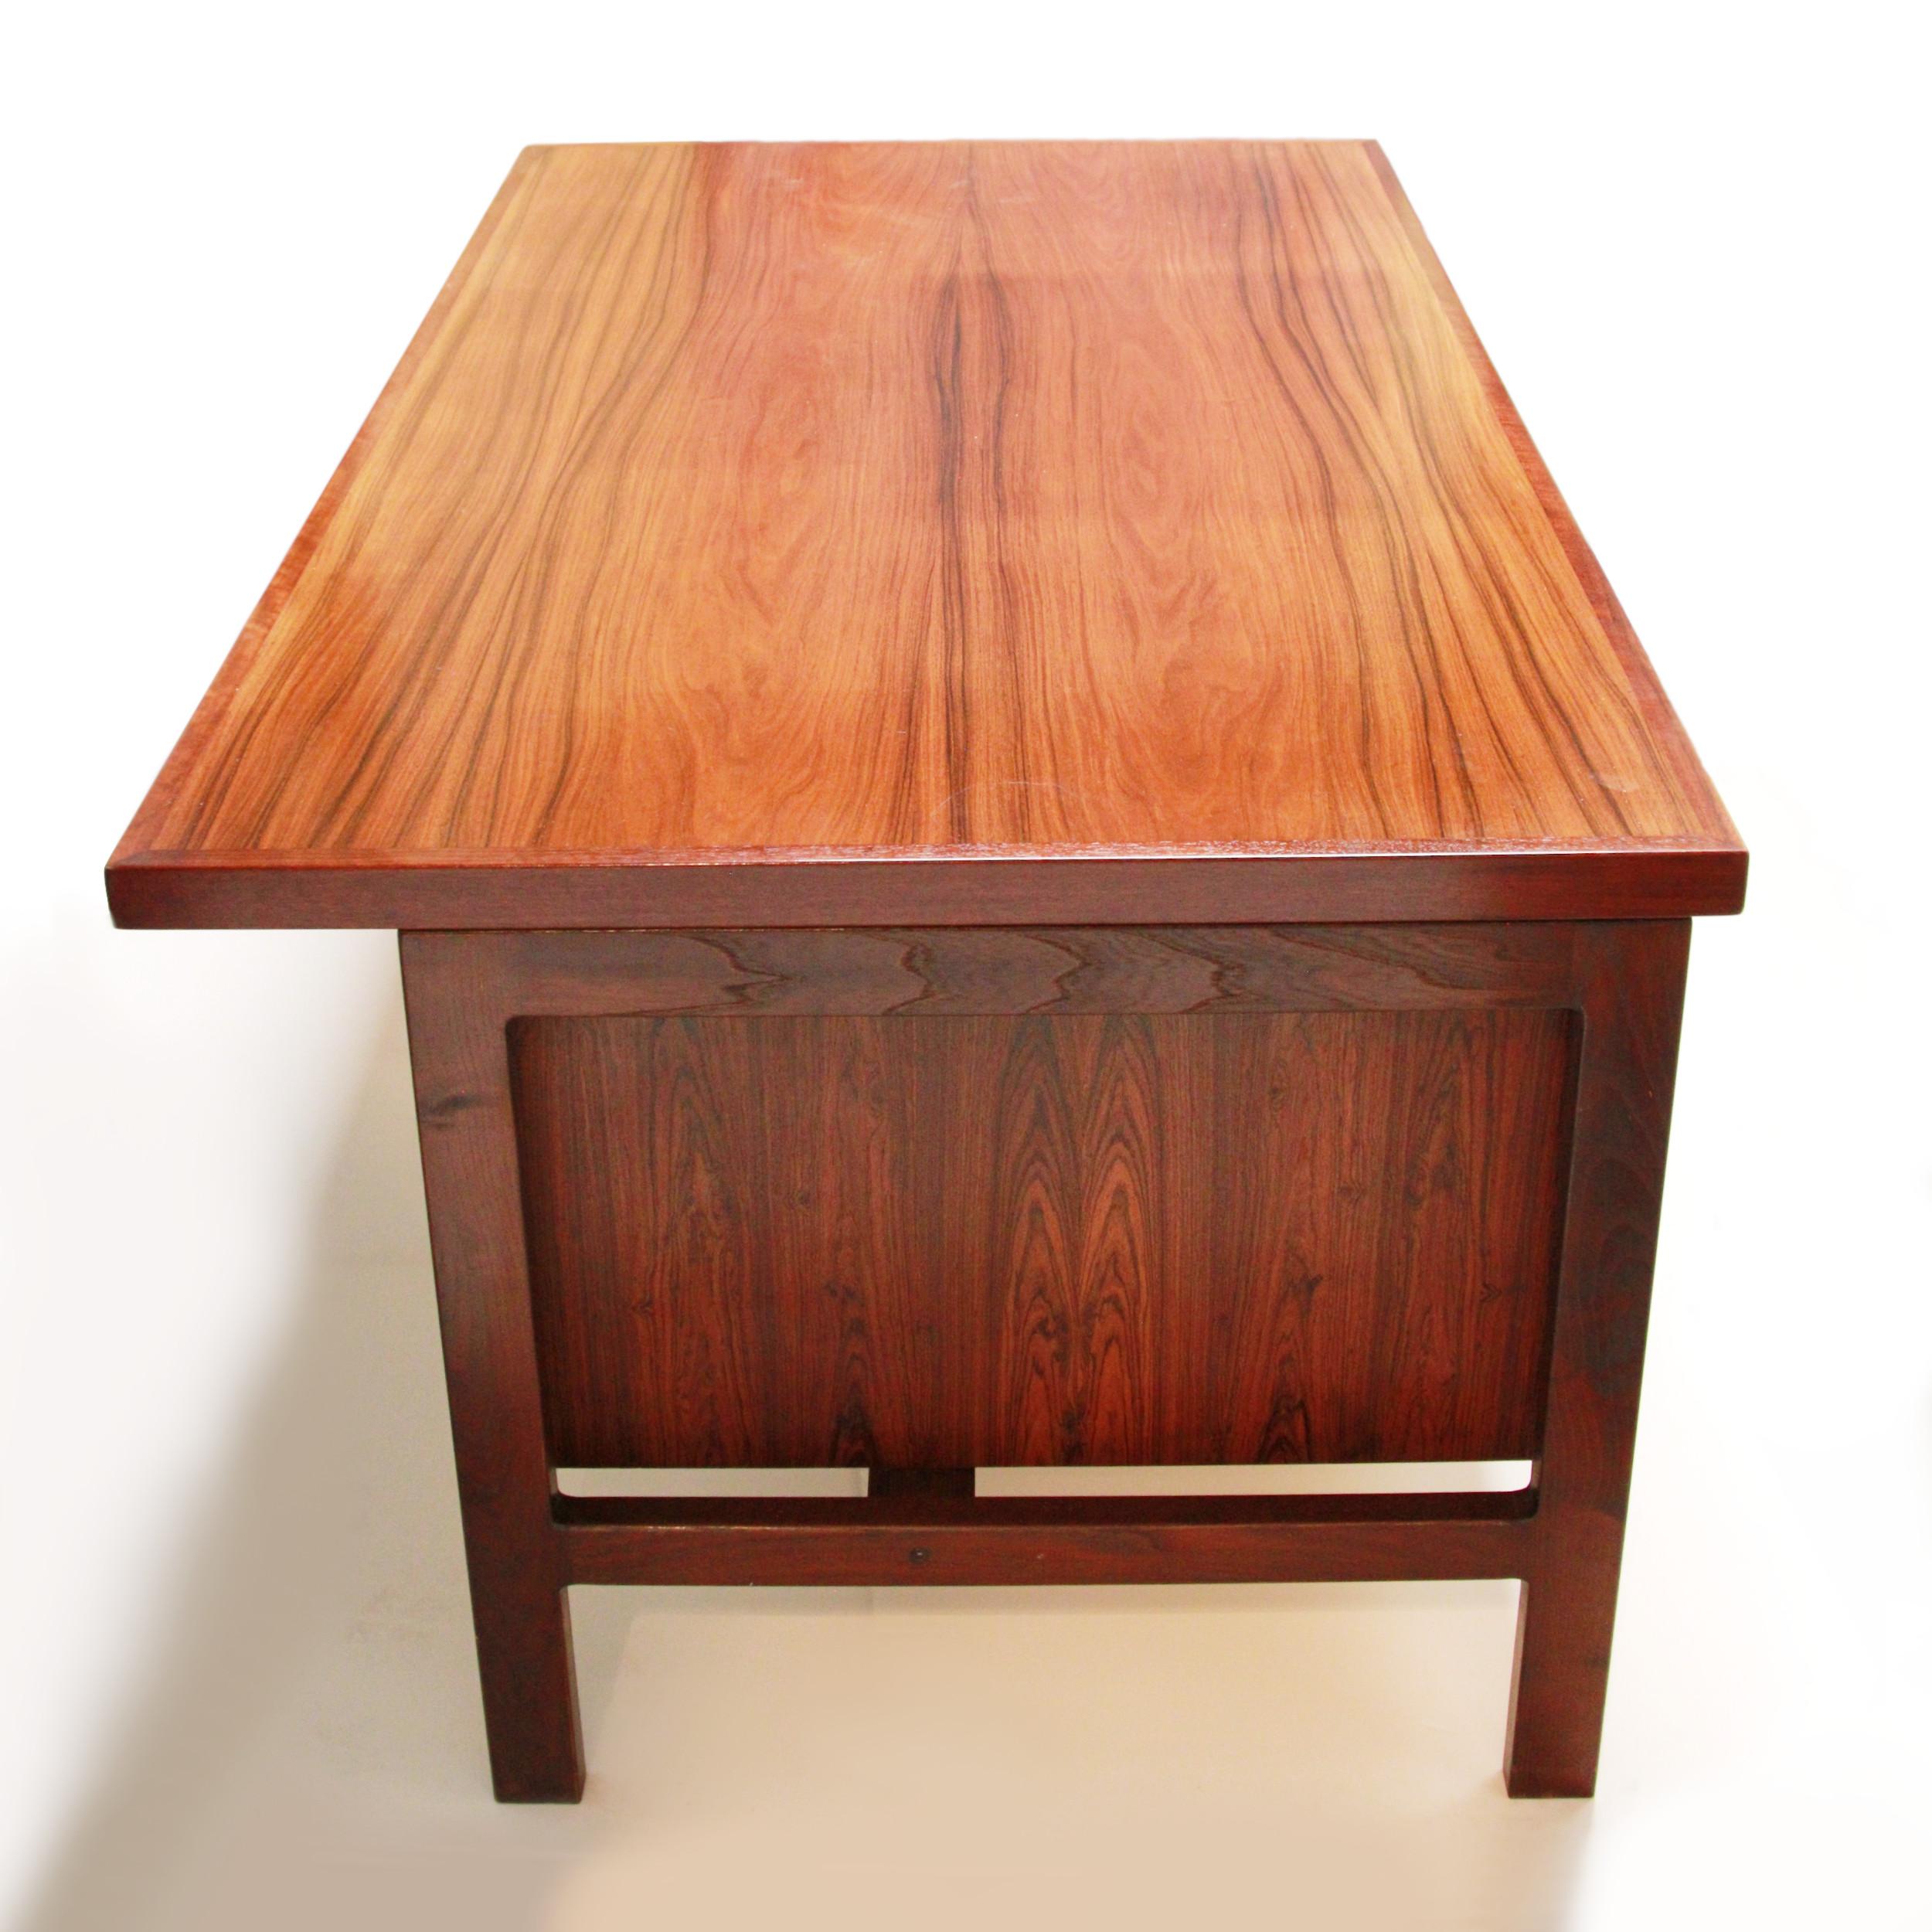 Vintage 1970s Mid-Century Danish Modern Rosewood Executive Desk by Arne Vodder In Good Condition For Sale In Lafayette, IN